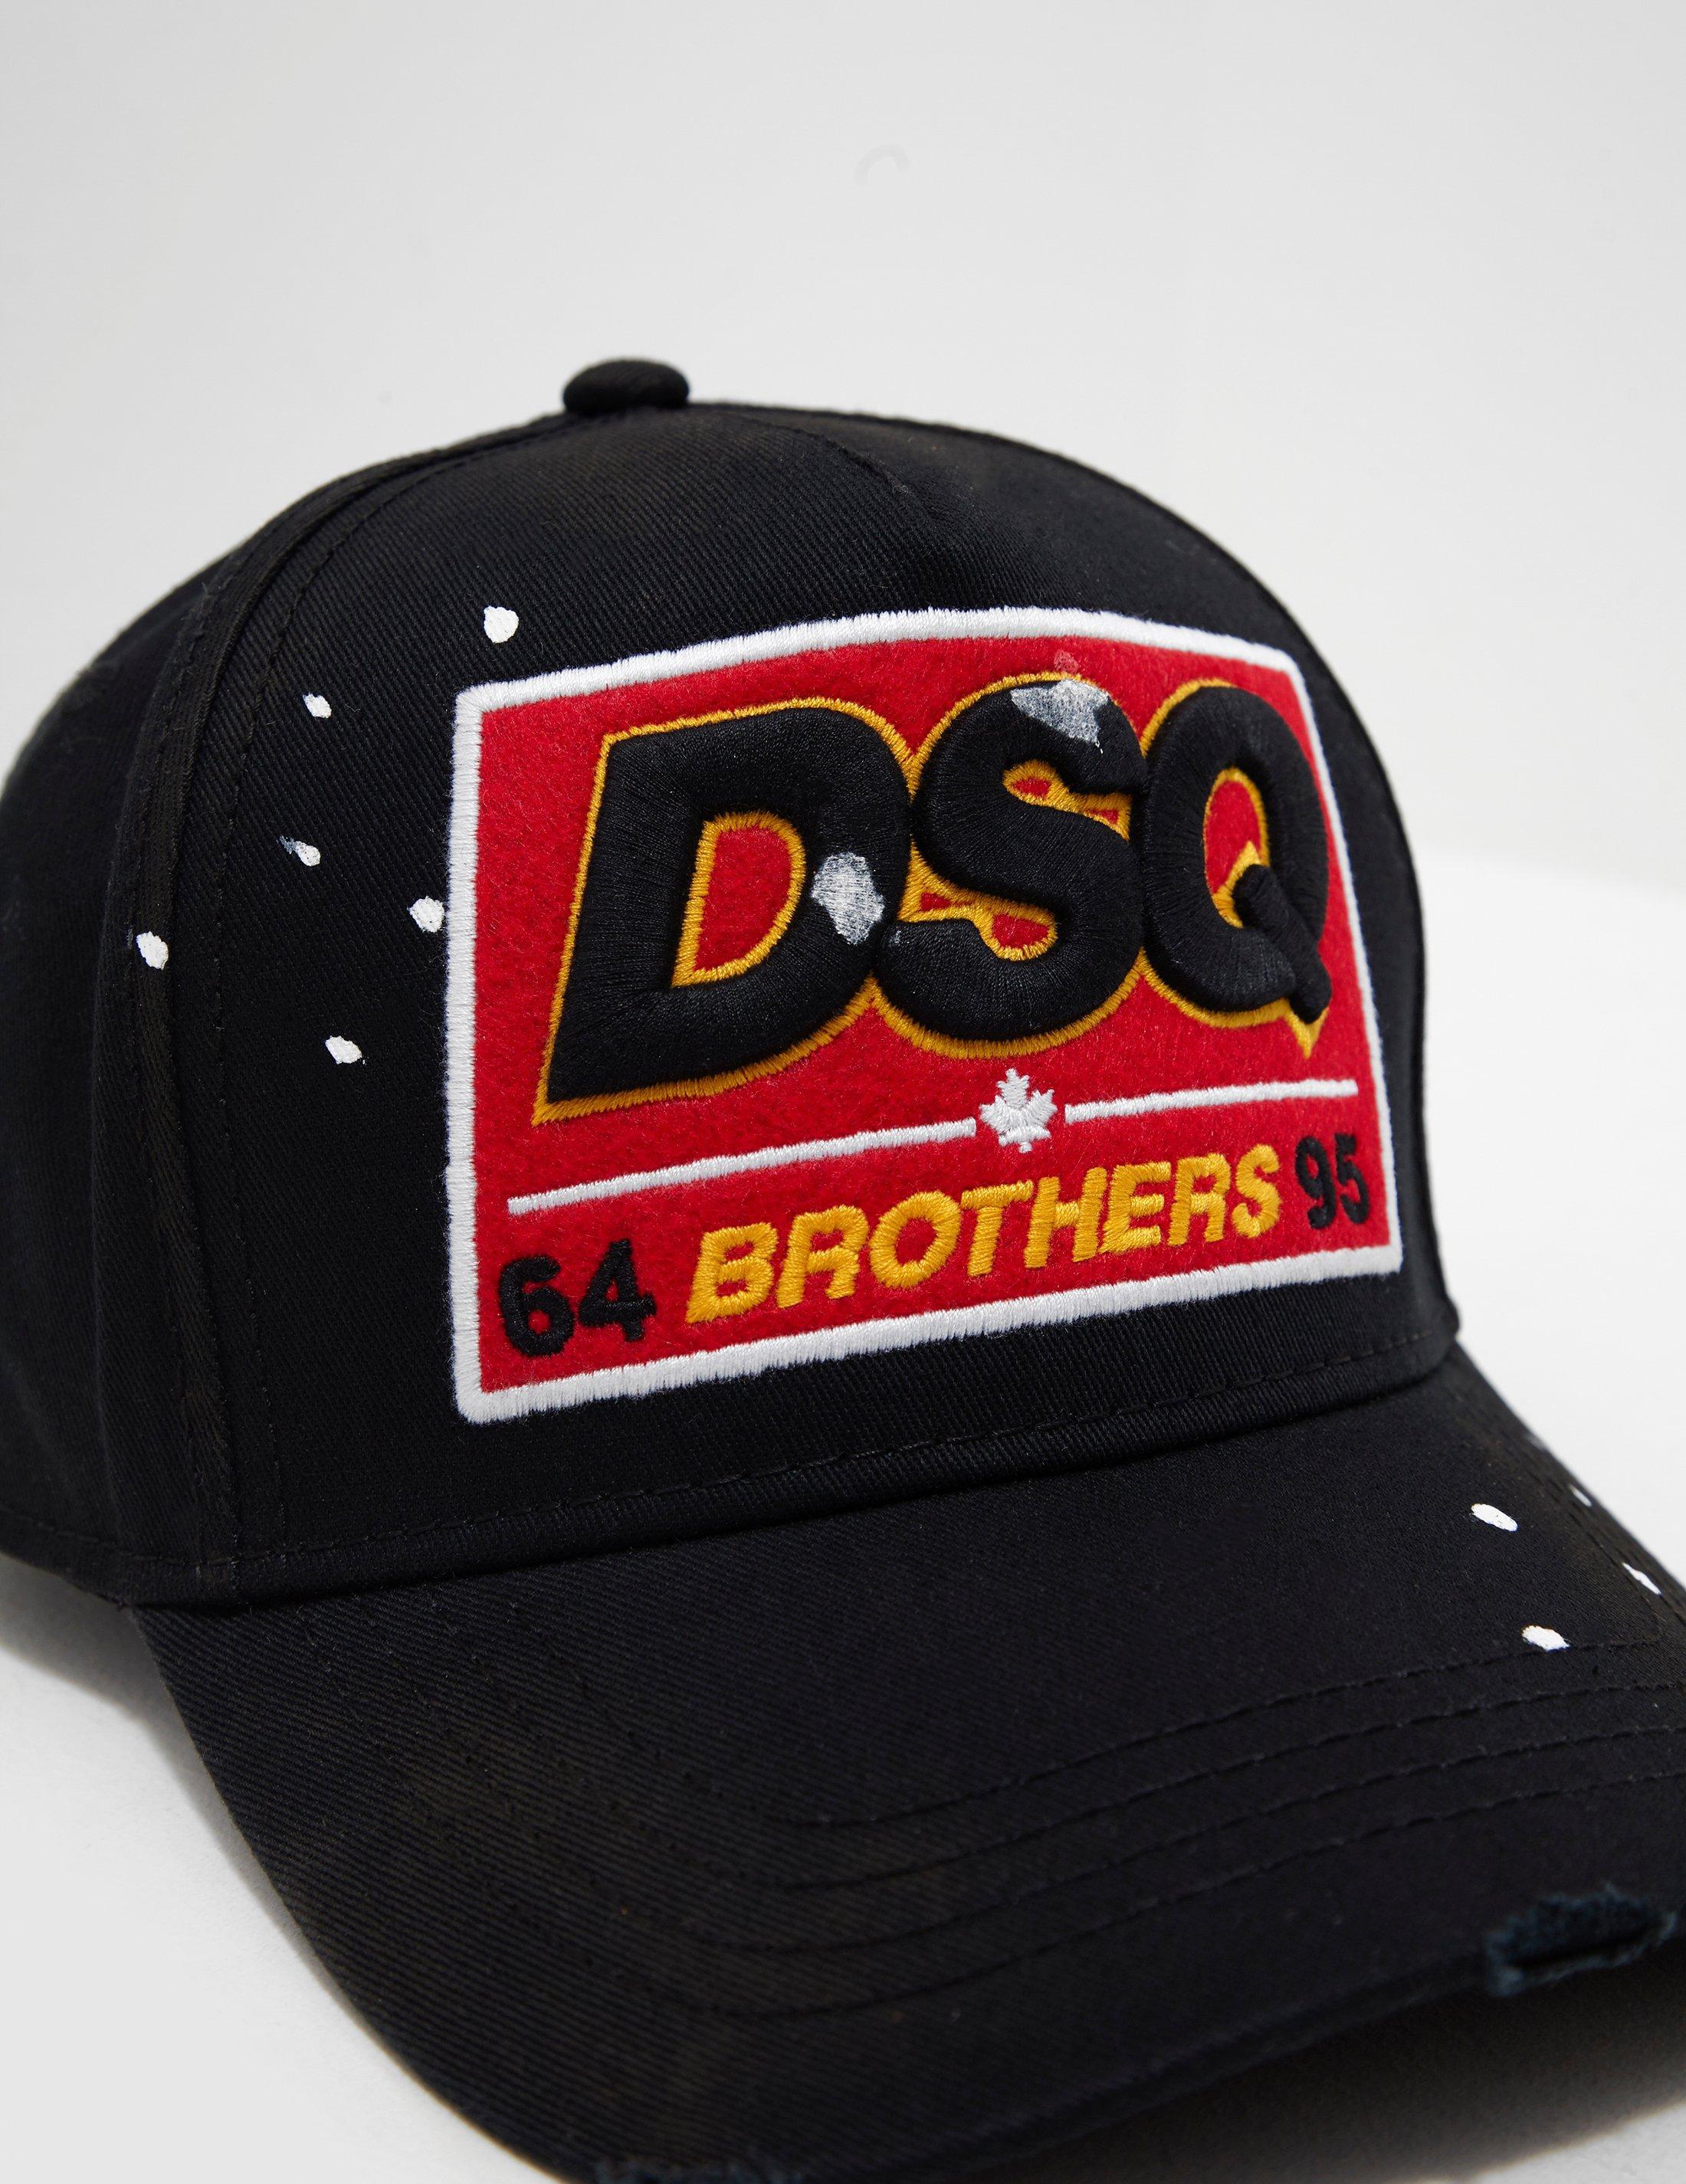 dsquared2 64 brothers 95